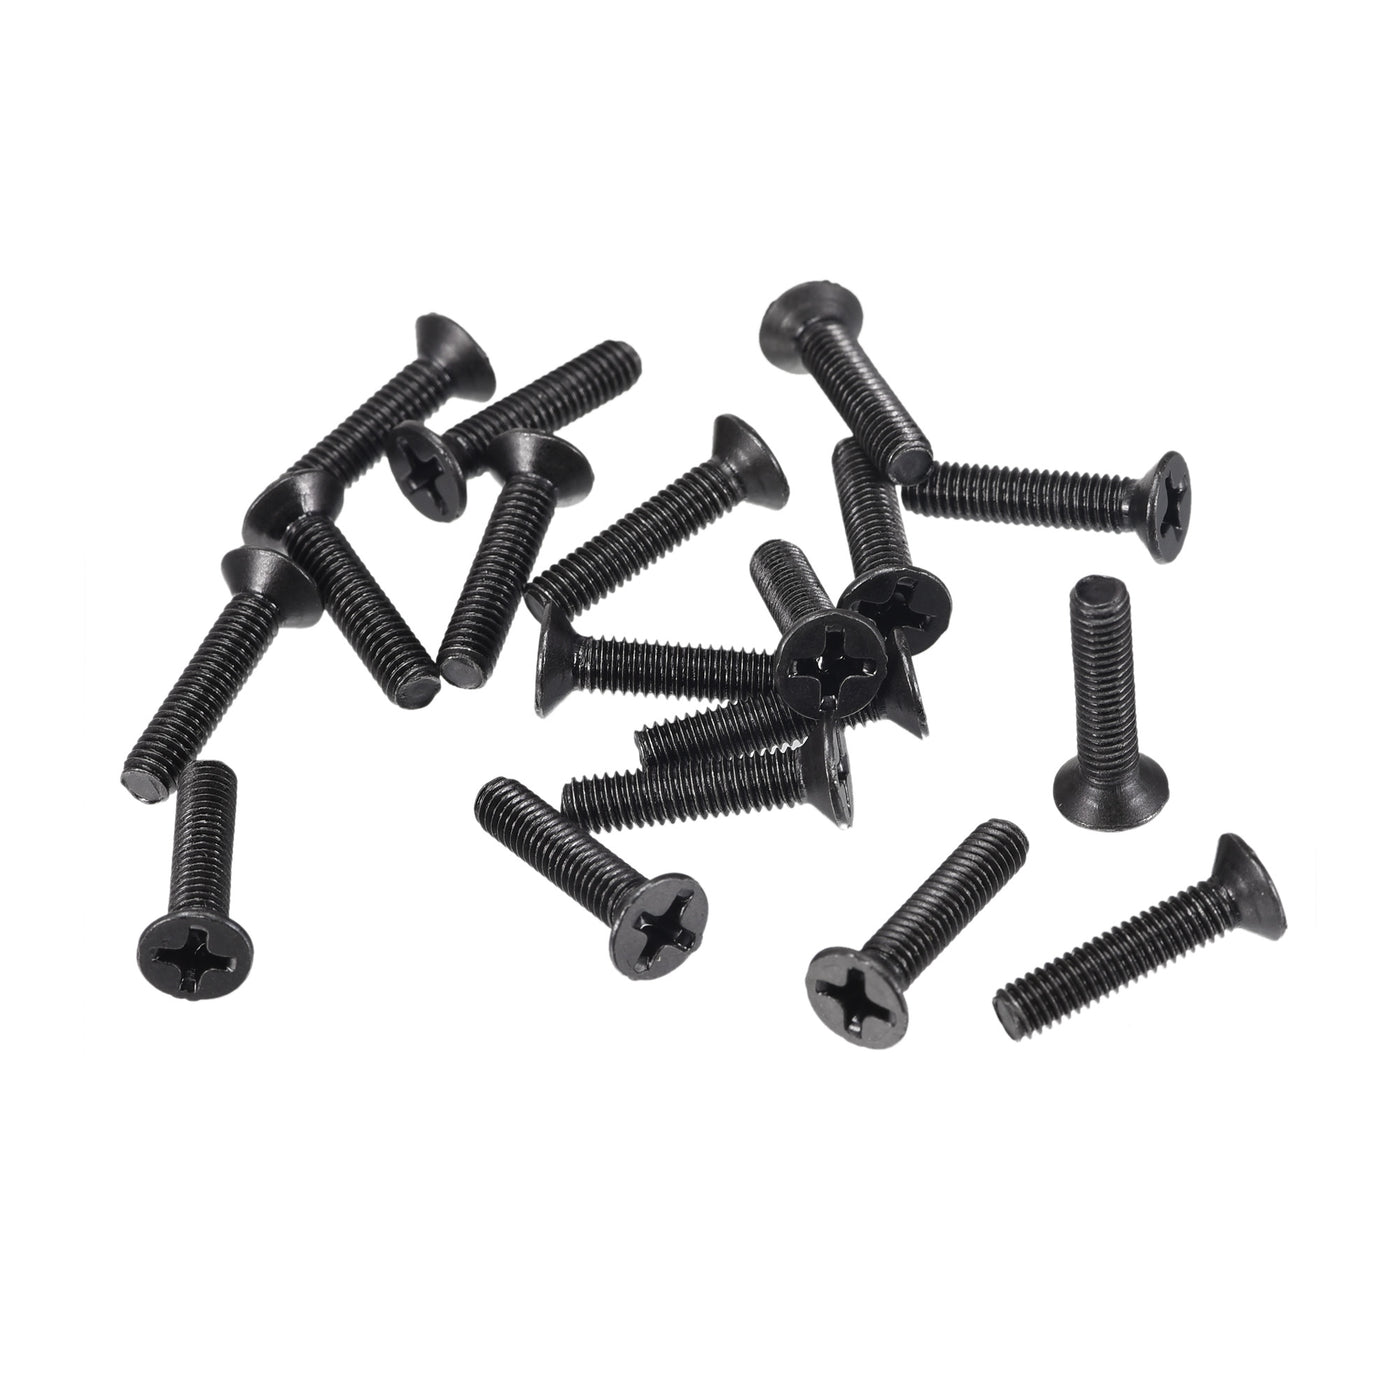 uxcell Uxcell M3.5 x 16mm Phillips Flat Head Screws Carbon Steel Machine Screws Black for Home Office Computer Case Appliance Equipment 50pcs